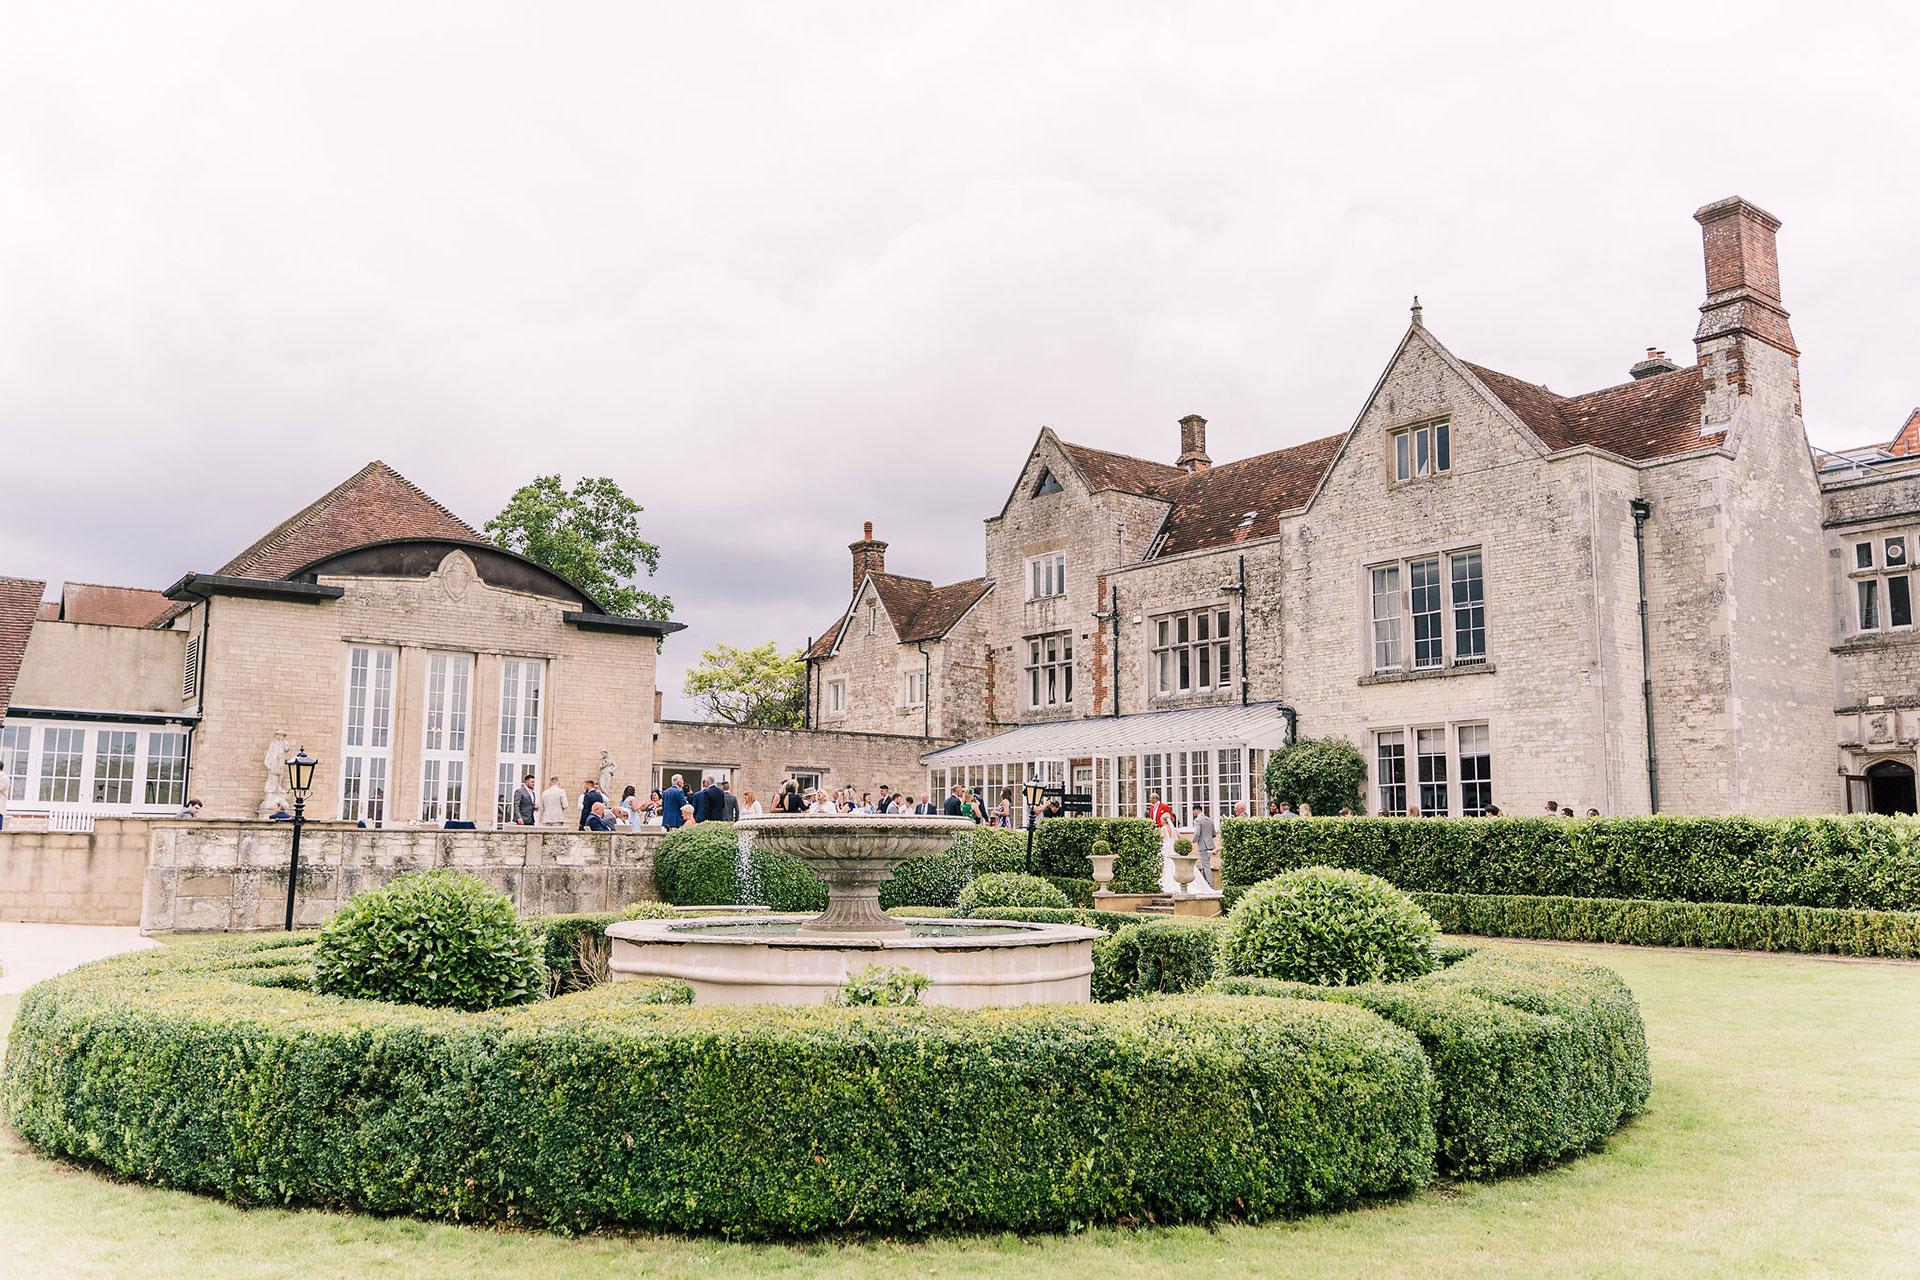 wedding event in gardens outside large country house